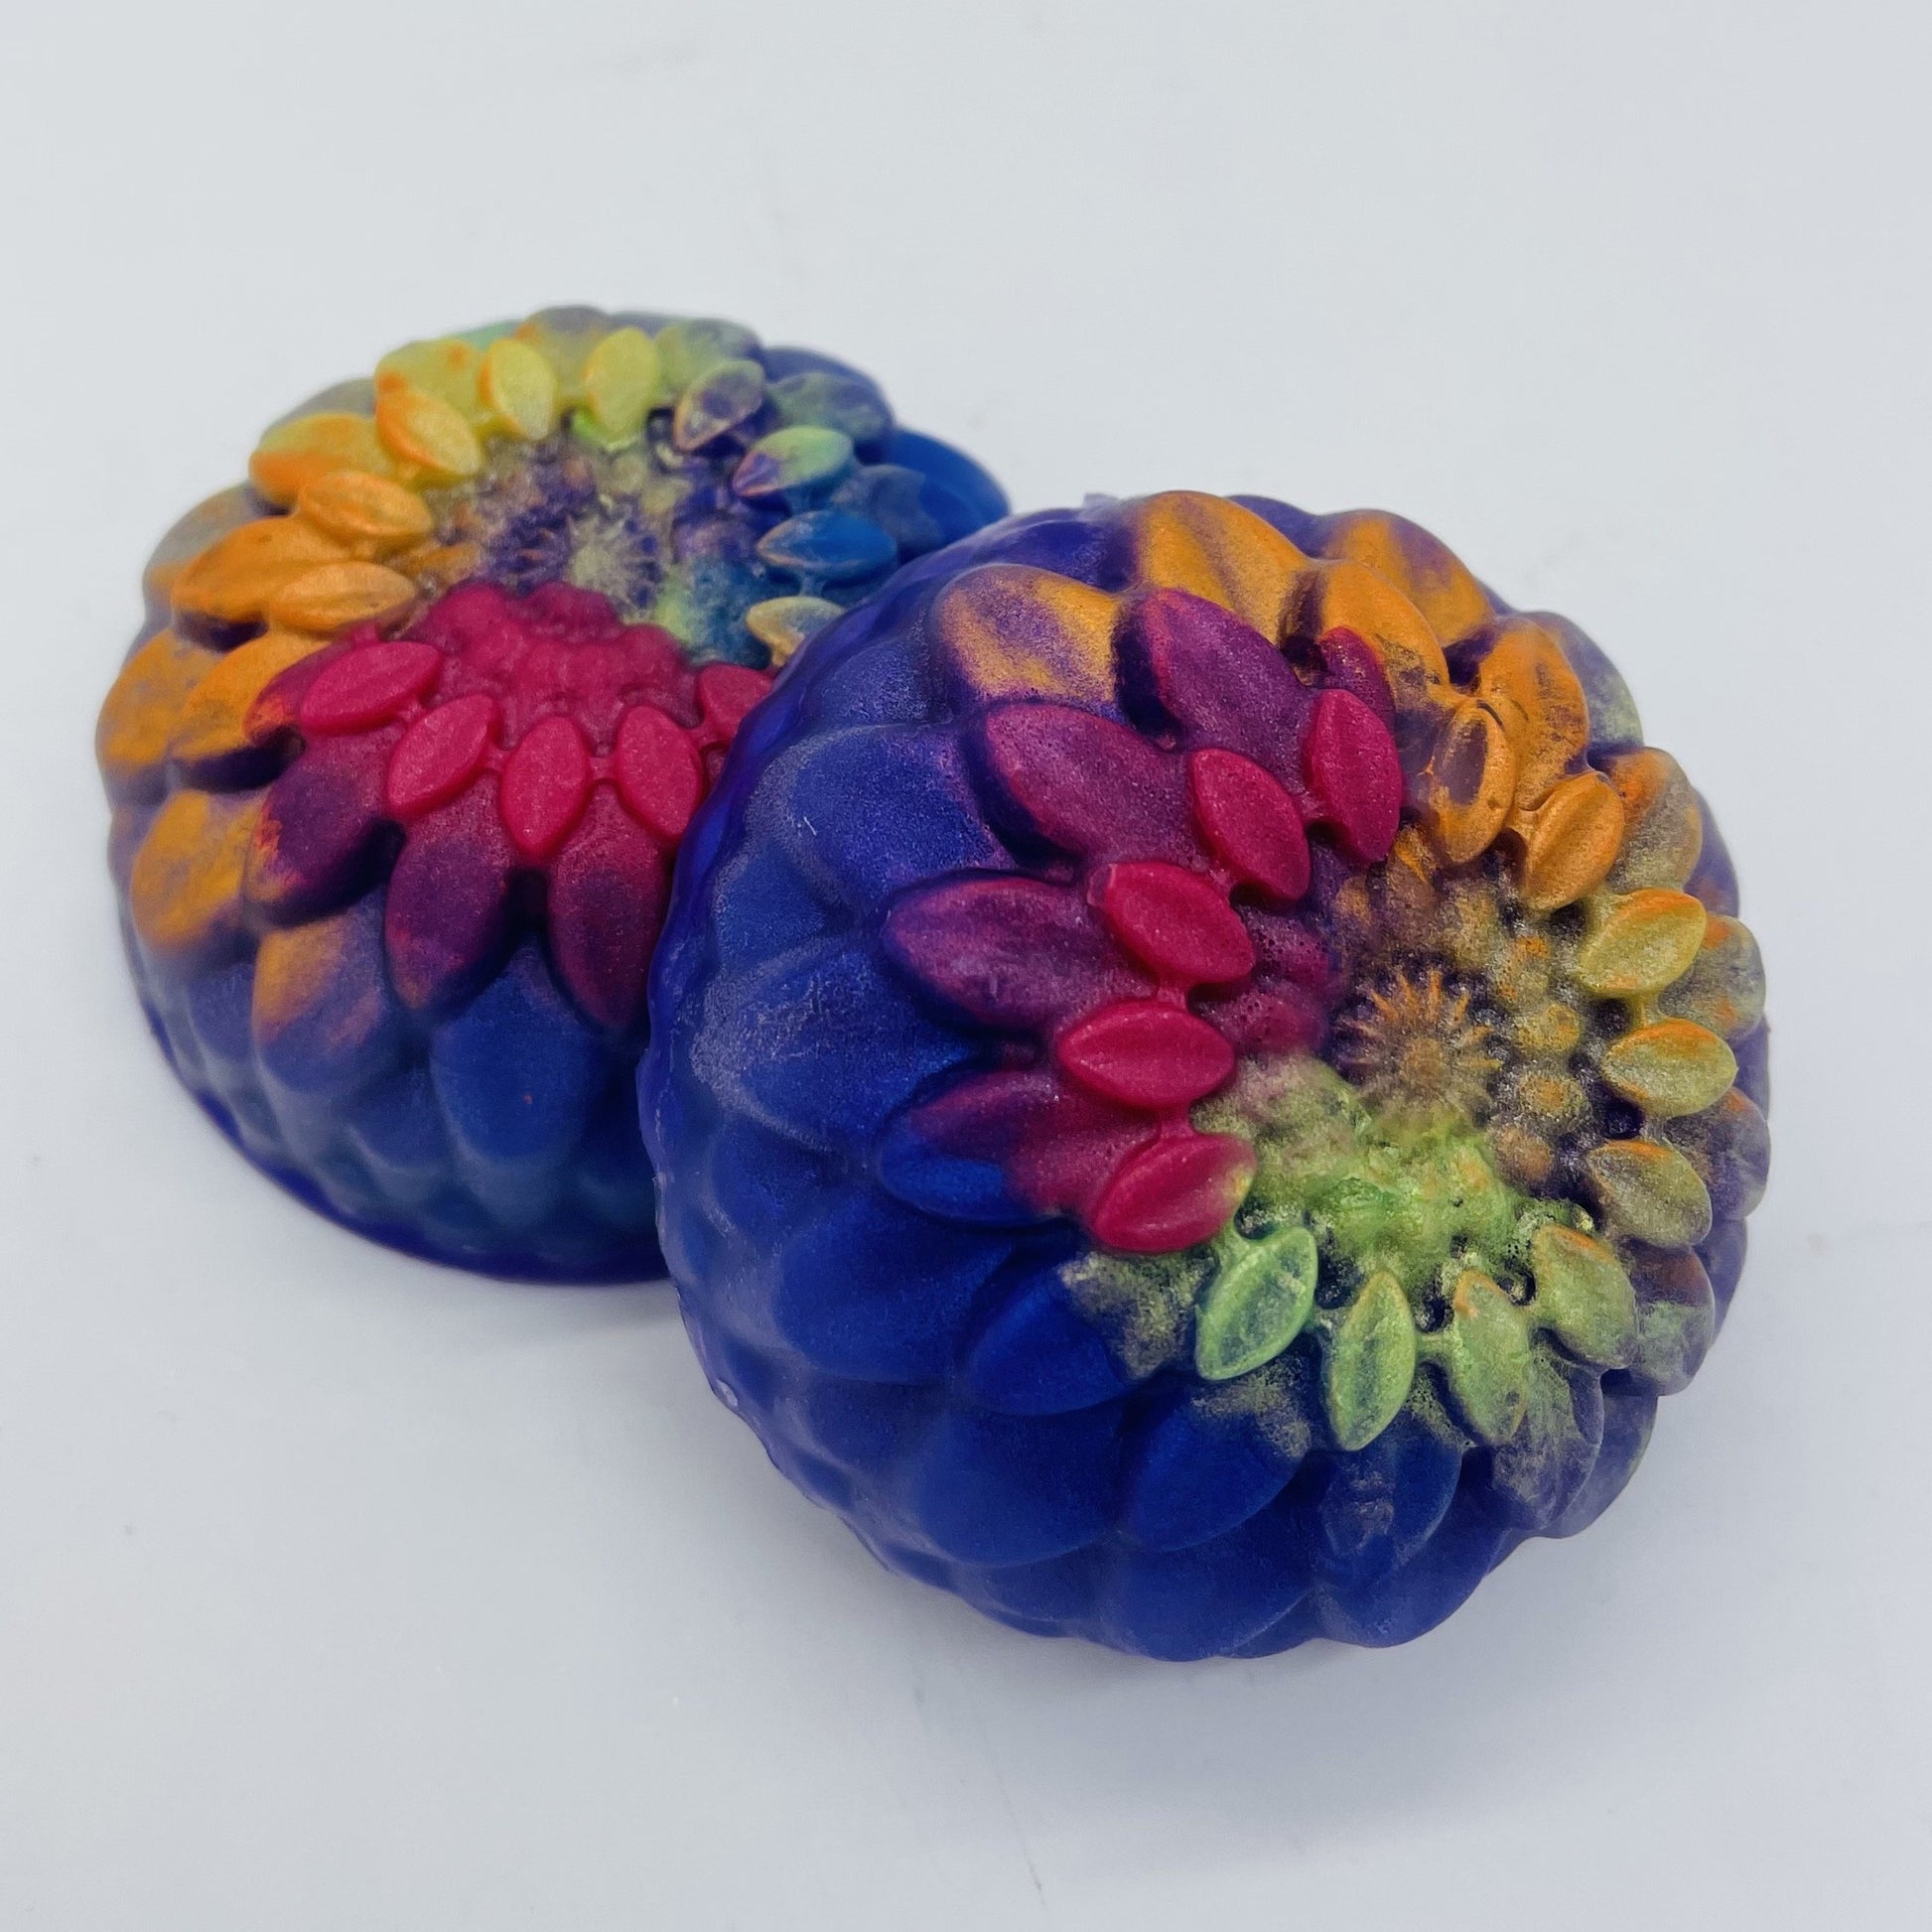 Two round floral soaps with deep blue bases and extra colors on top in pink, orange and yellow.